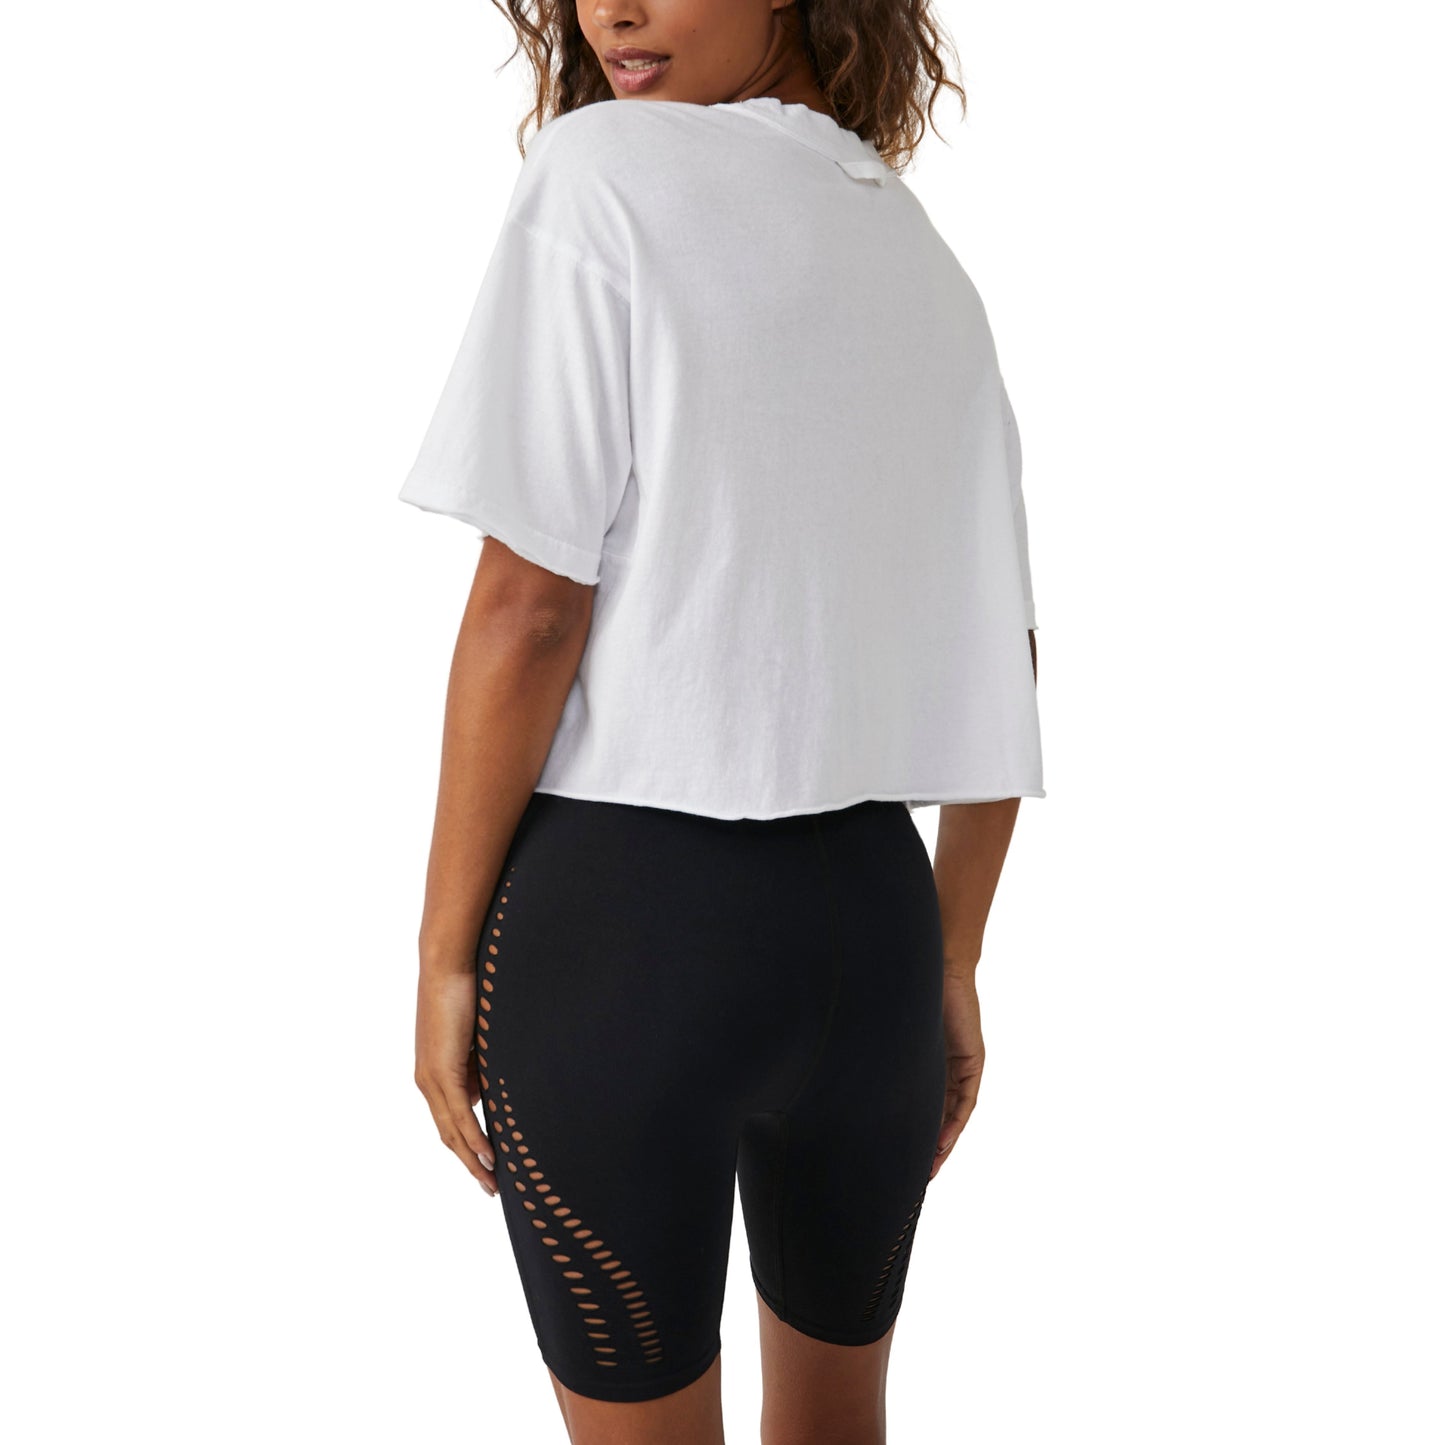 Woman from the back wearing a white Free People Movement "Inspire Tee" t-shirt and black cycling shorts with cut-out details along the legs.